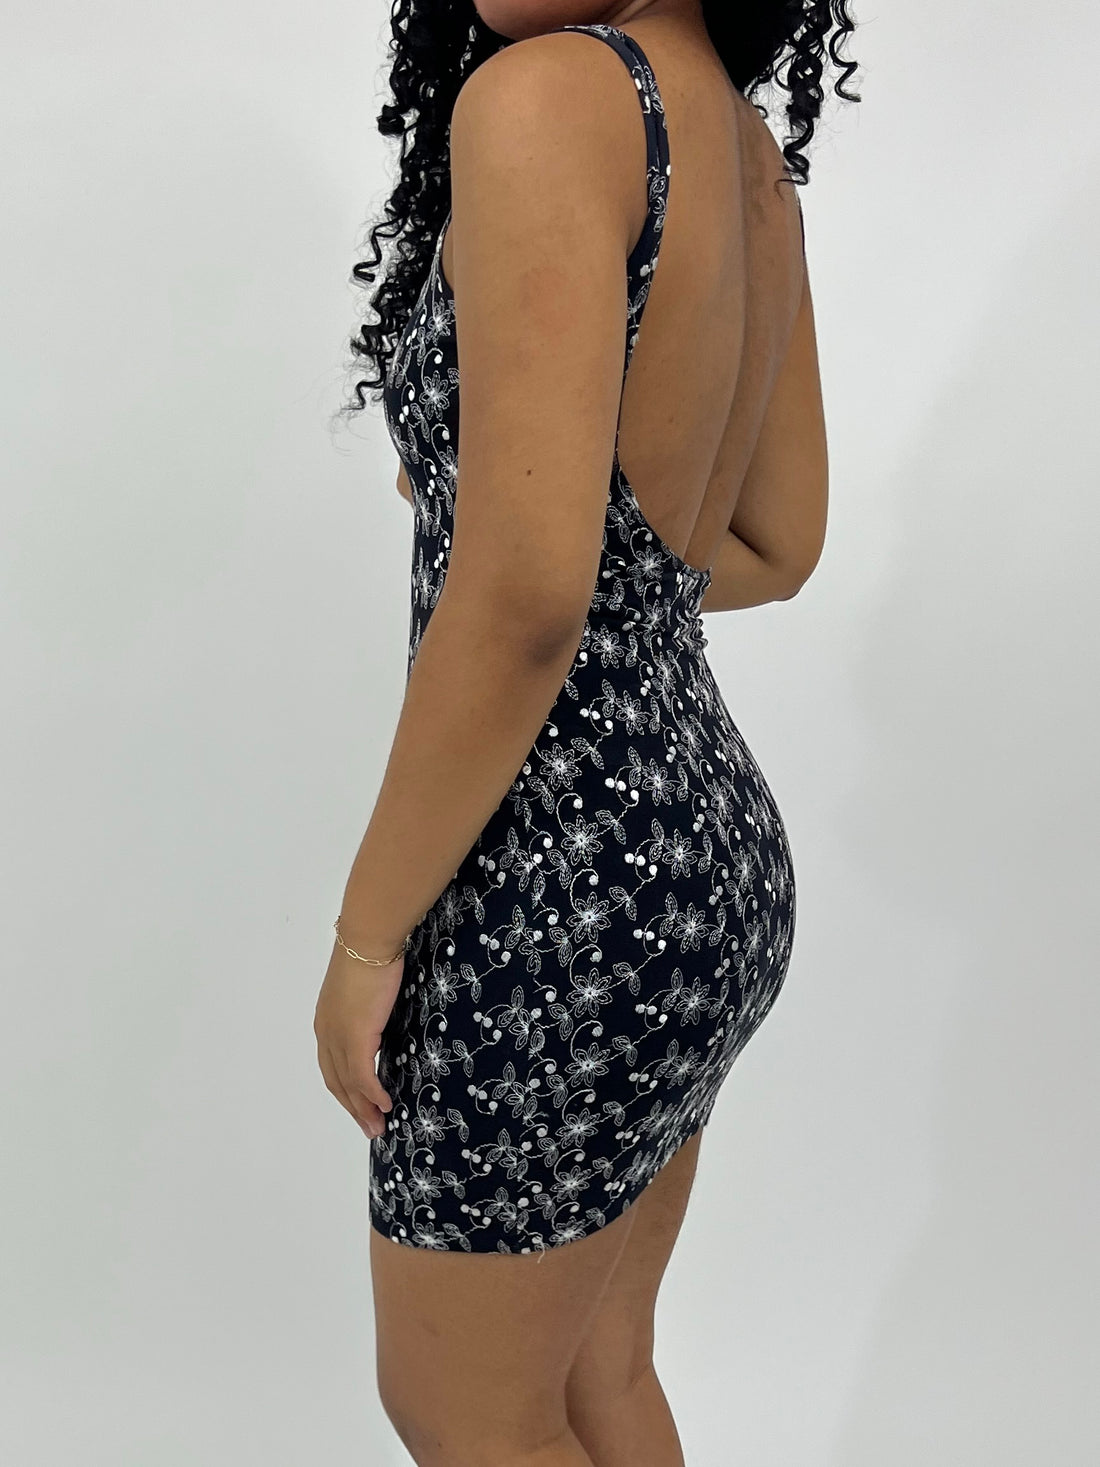 Floral Embroidered Backless Mini Dress (XS)